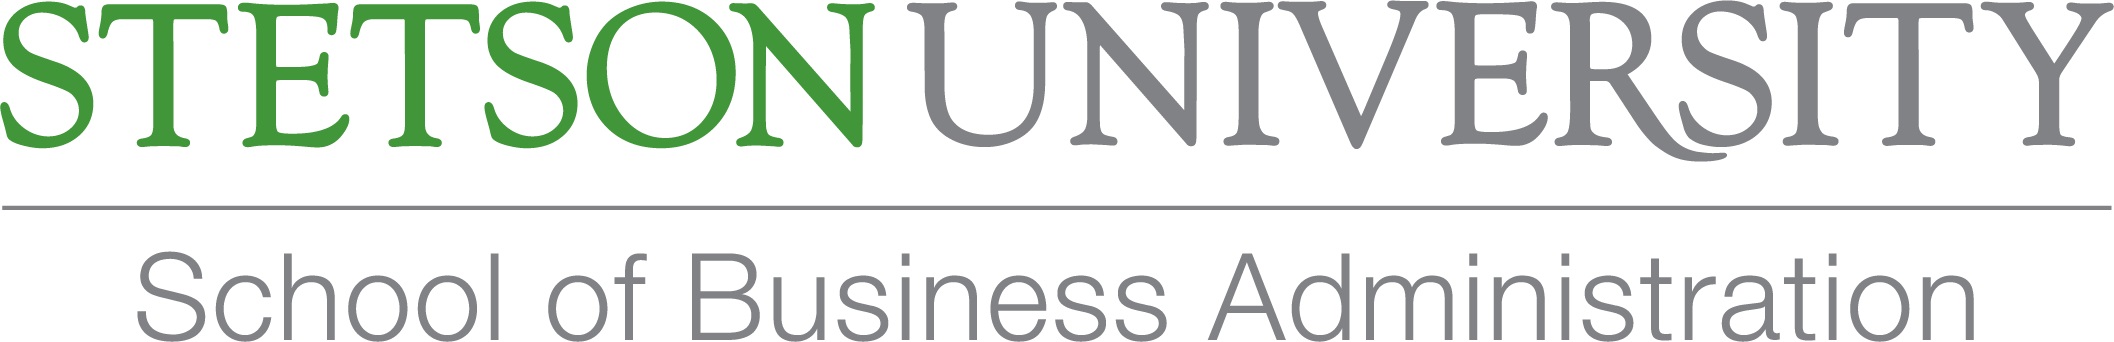 School of Business Administration Logo